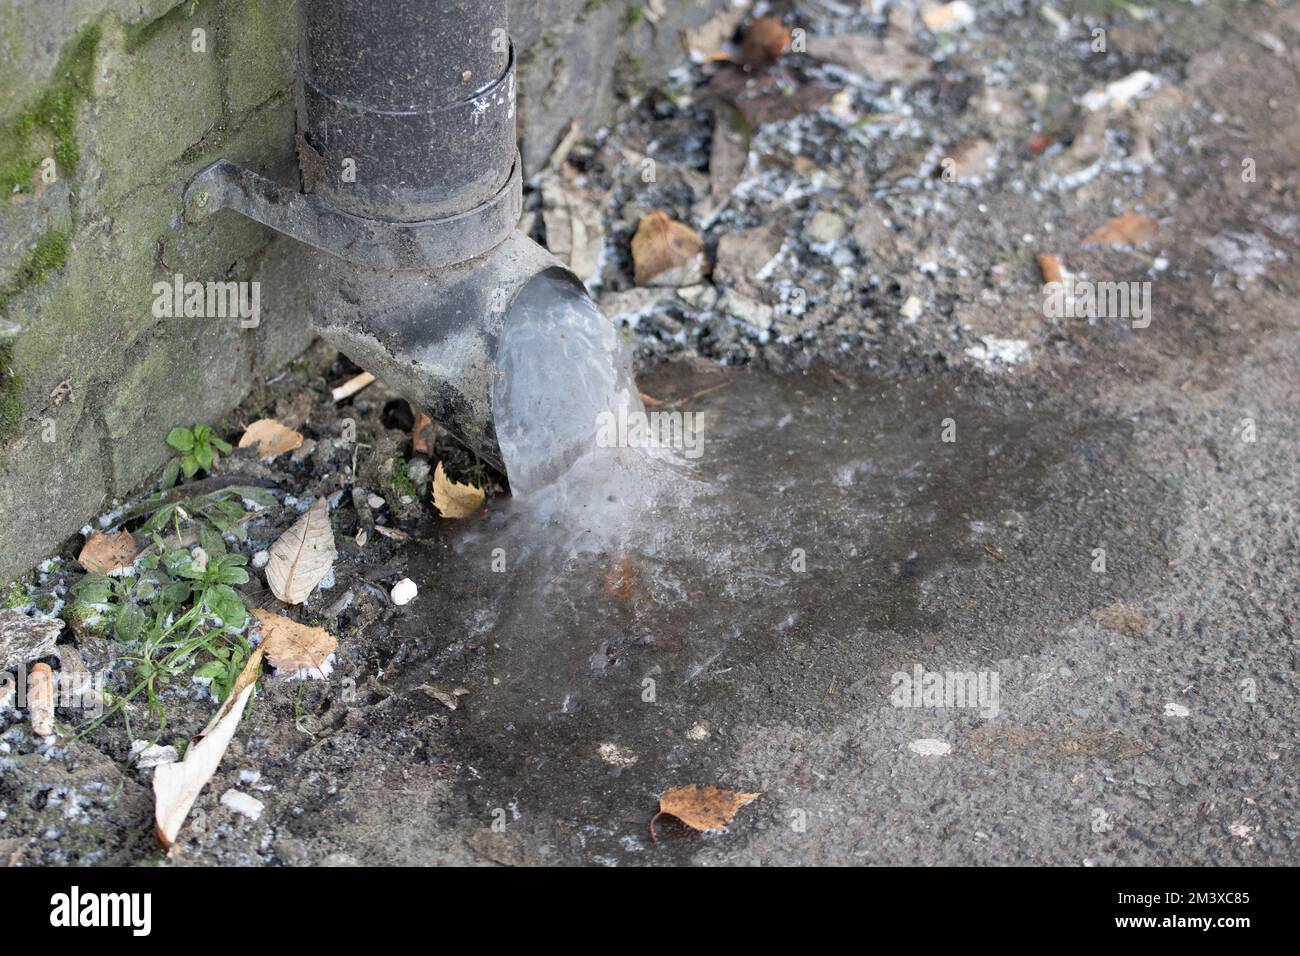 Frozen water in down pipe from gutter. UK cold snap sees pipes freeze which leads to problems when weather warms up and burst pipes. Manchester UK Picture : GARYROBERTS/WORLDWIDEFEATURES.COM Stock Photo